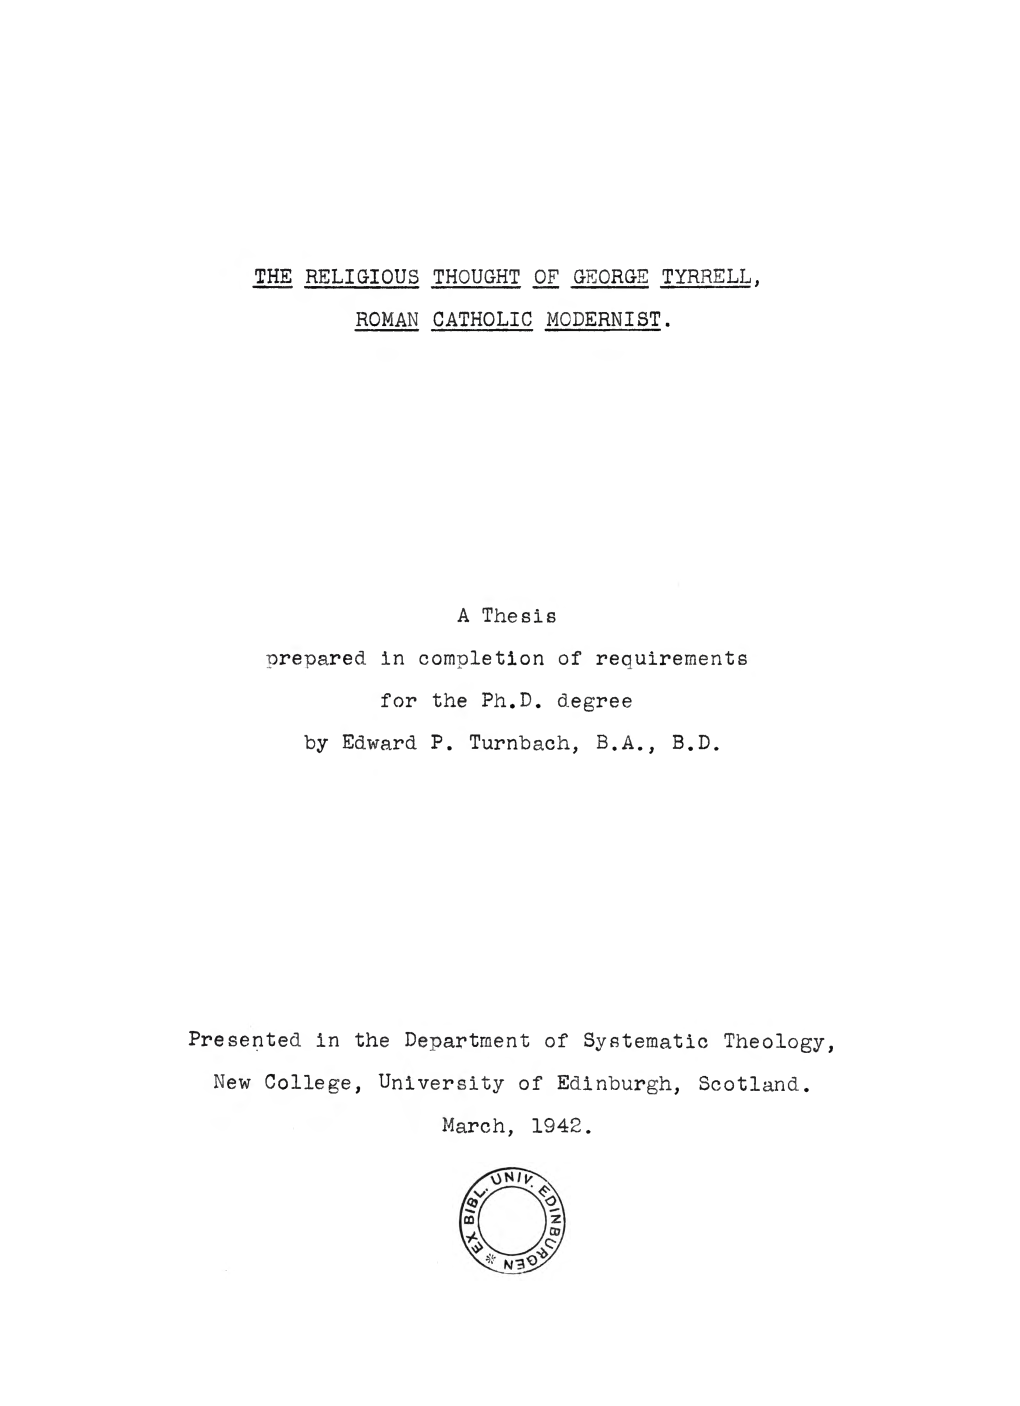 A Thesis Prepared in Completion of Requirements for the Ph.D. Degree by Edward P